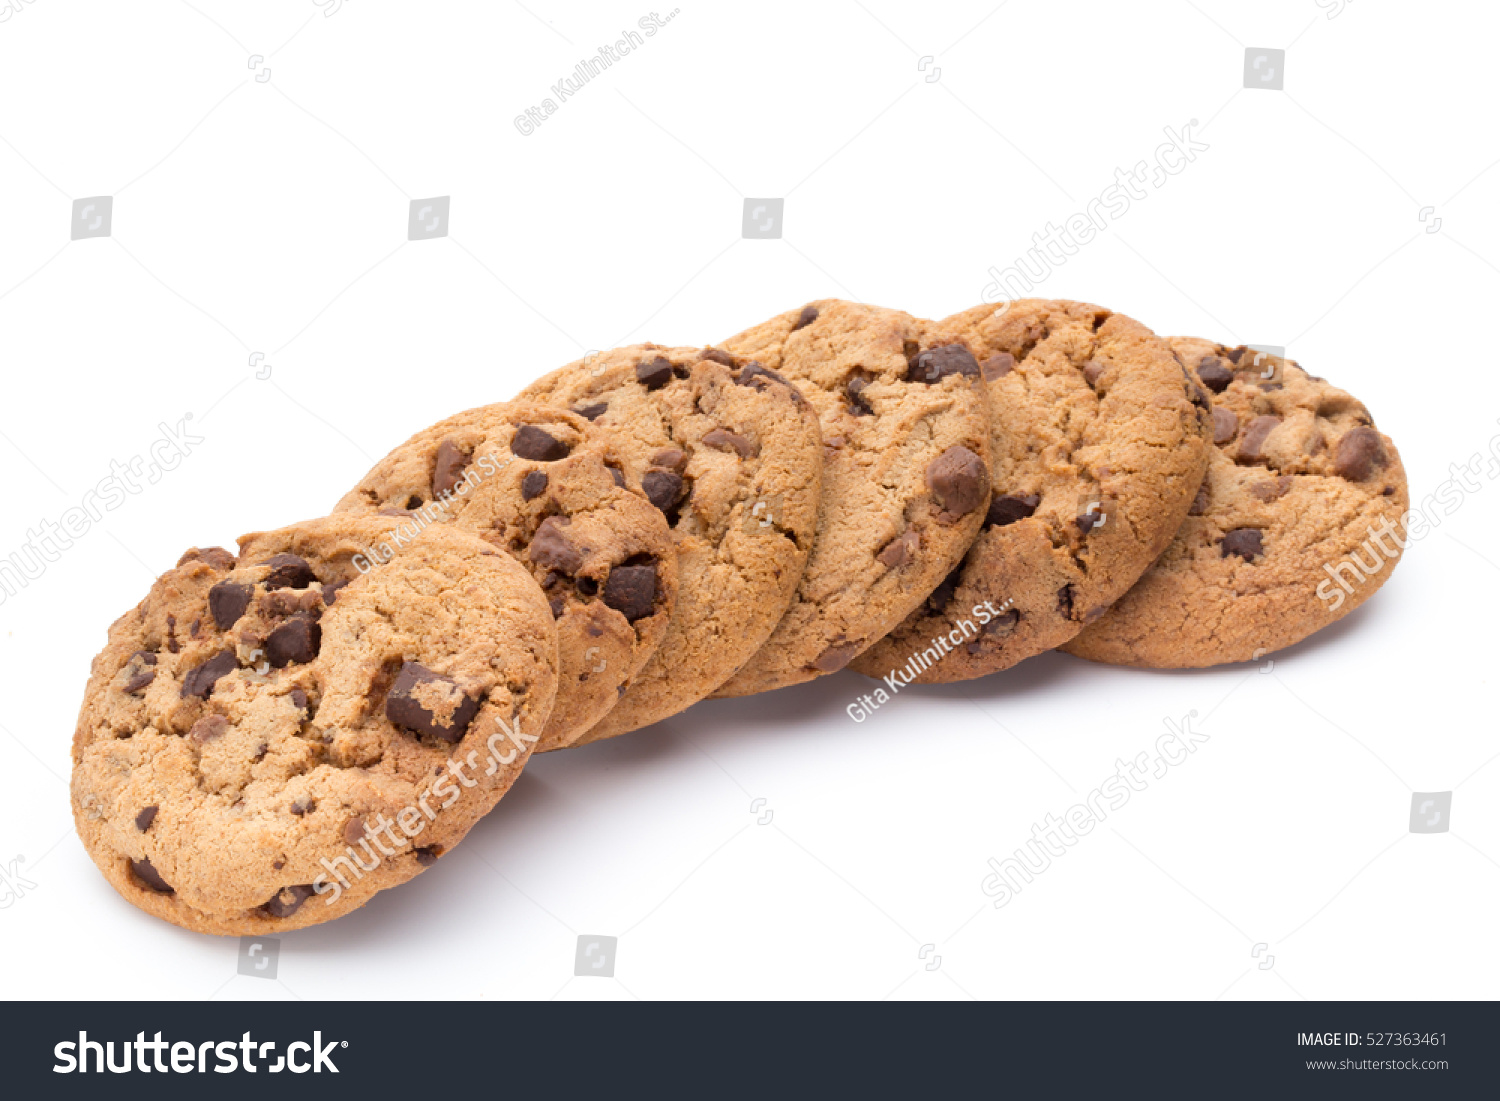 Chocolate chip cookie on white background. #527363461